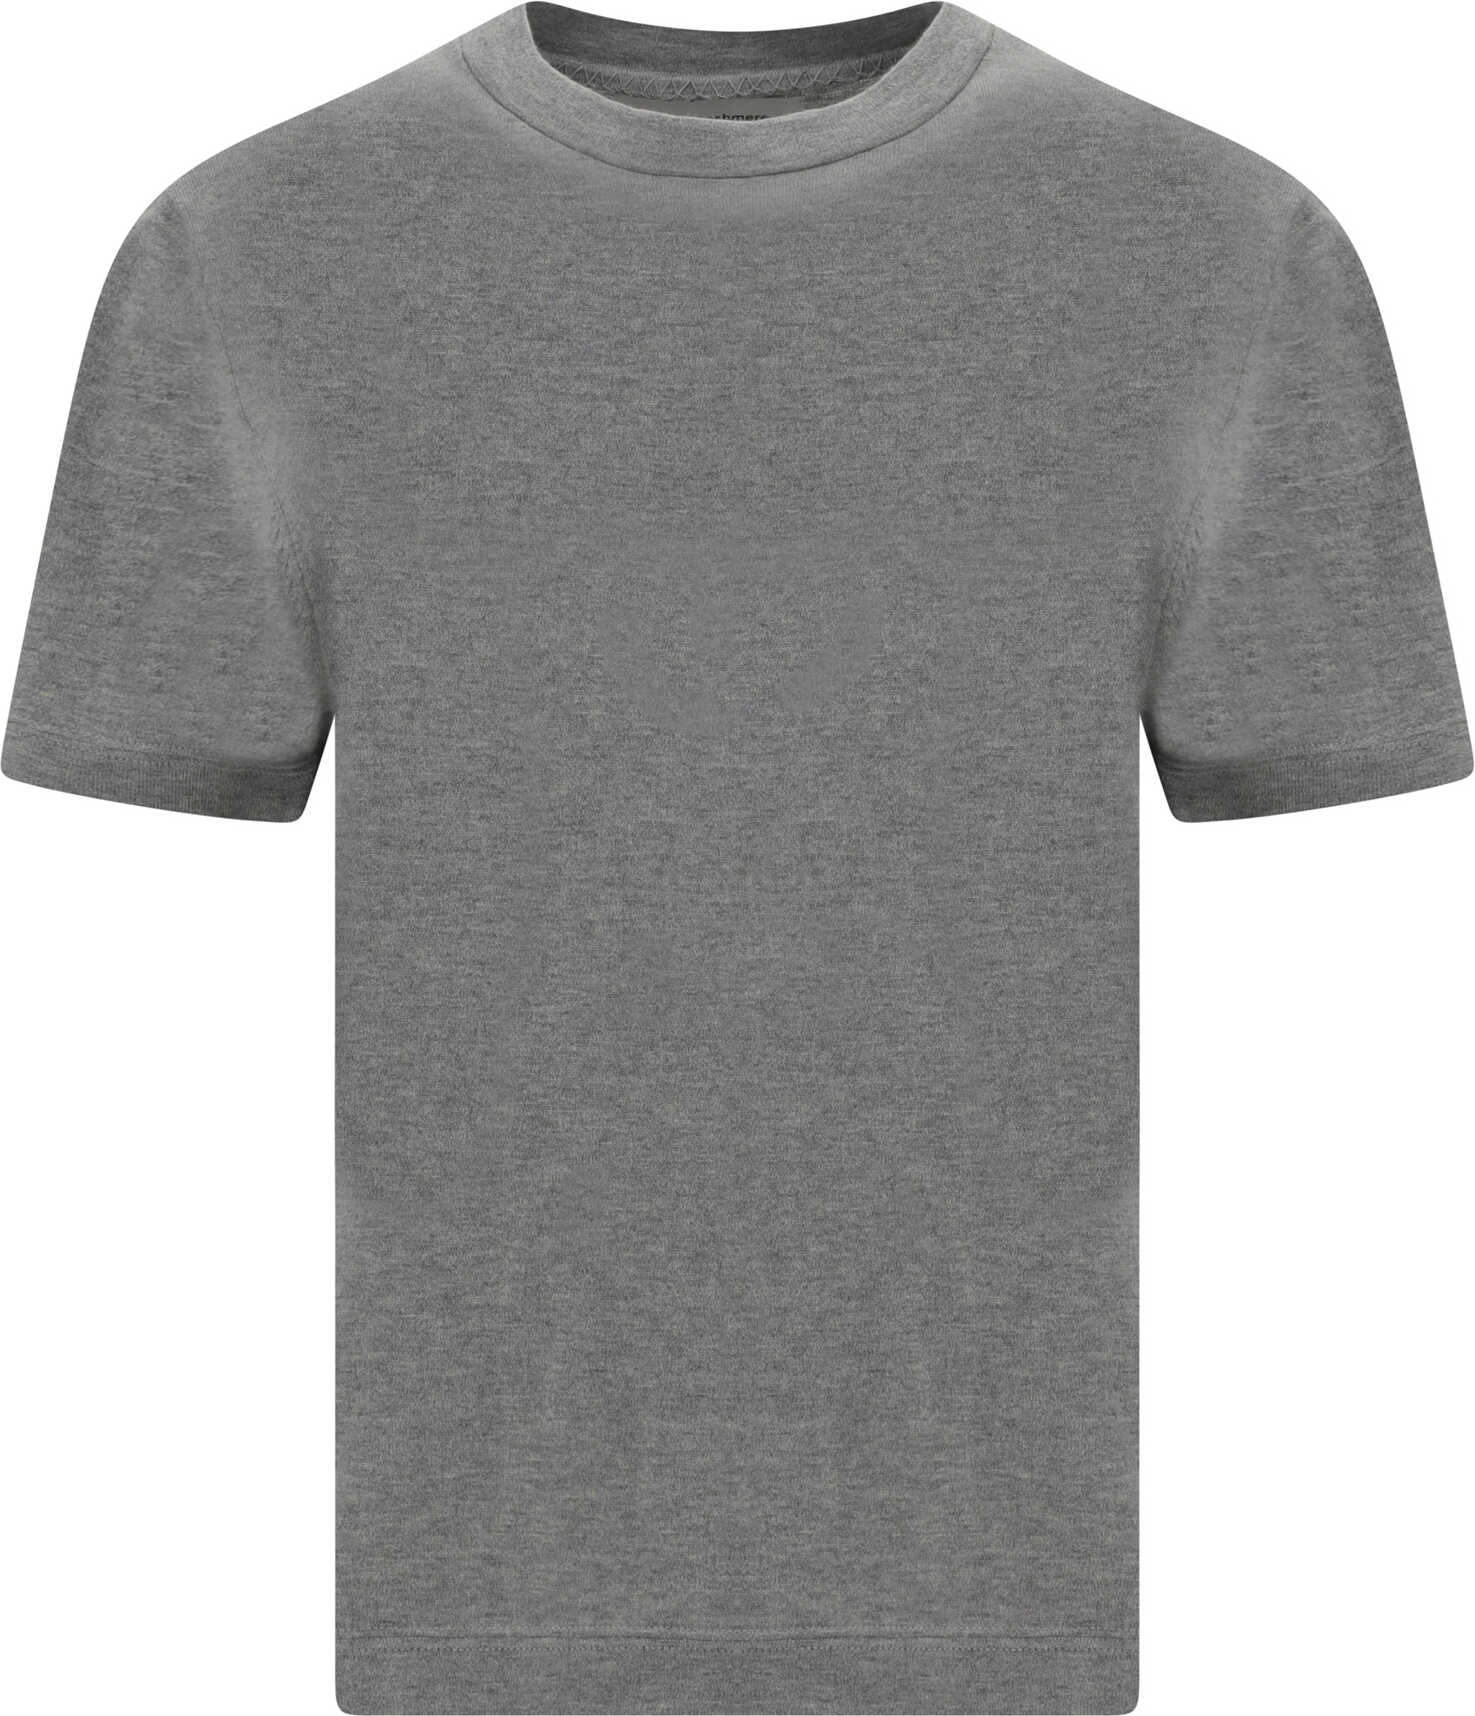 EXTREME CASHMERE TOP GREY